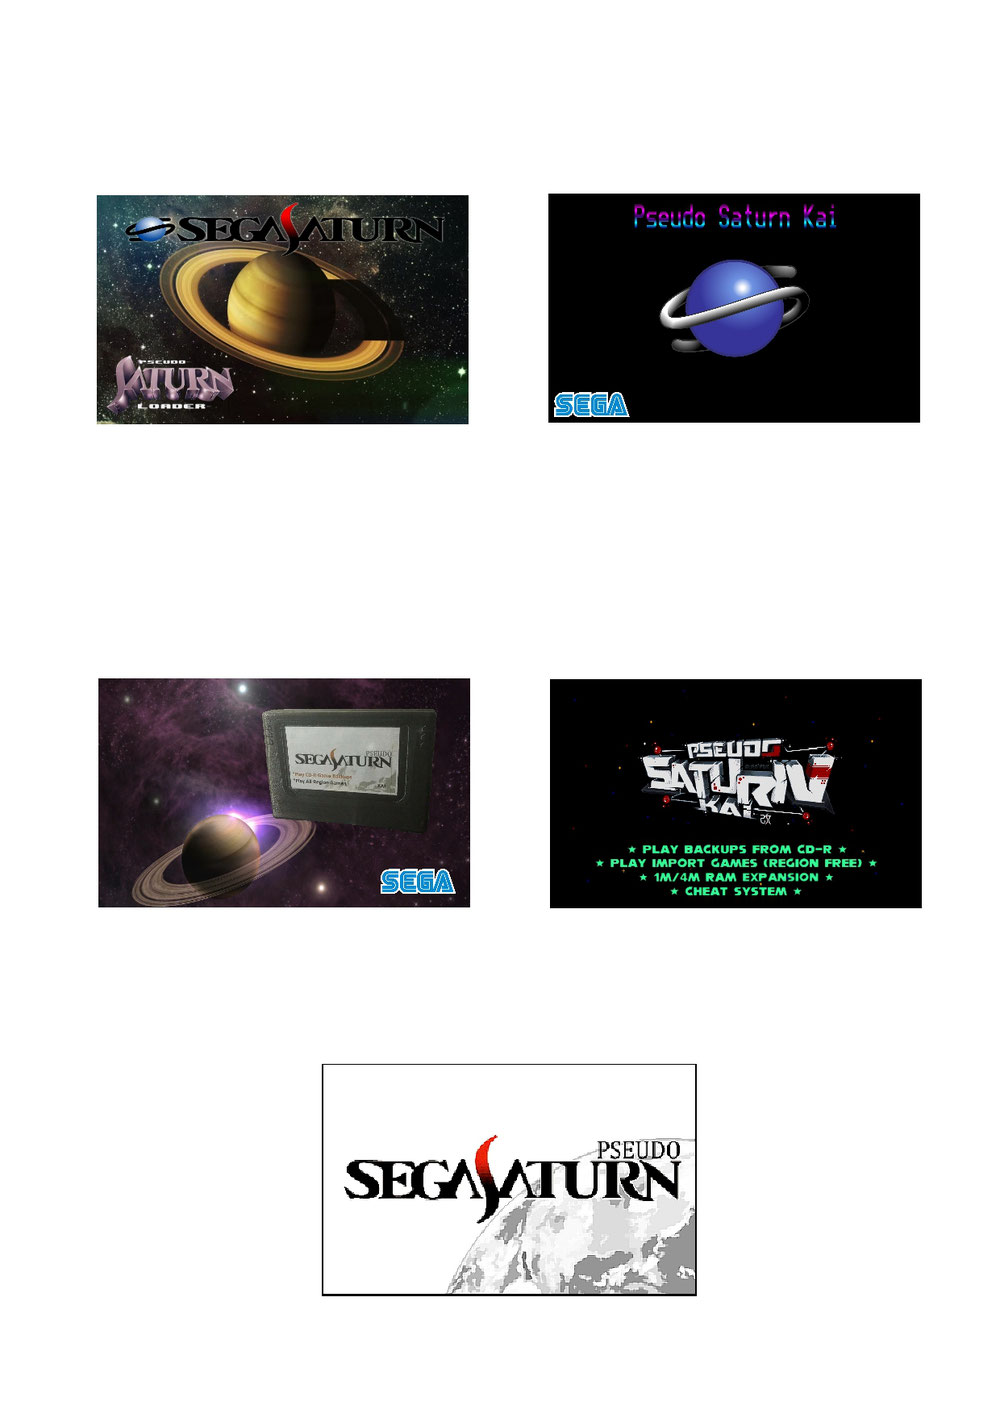 Labels for my Pseudo Saturn flashed Action Replay